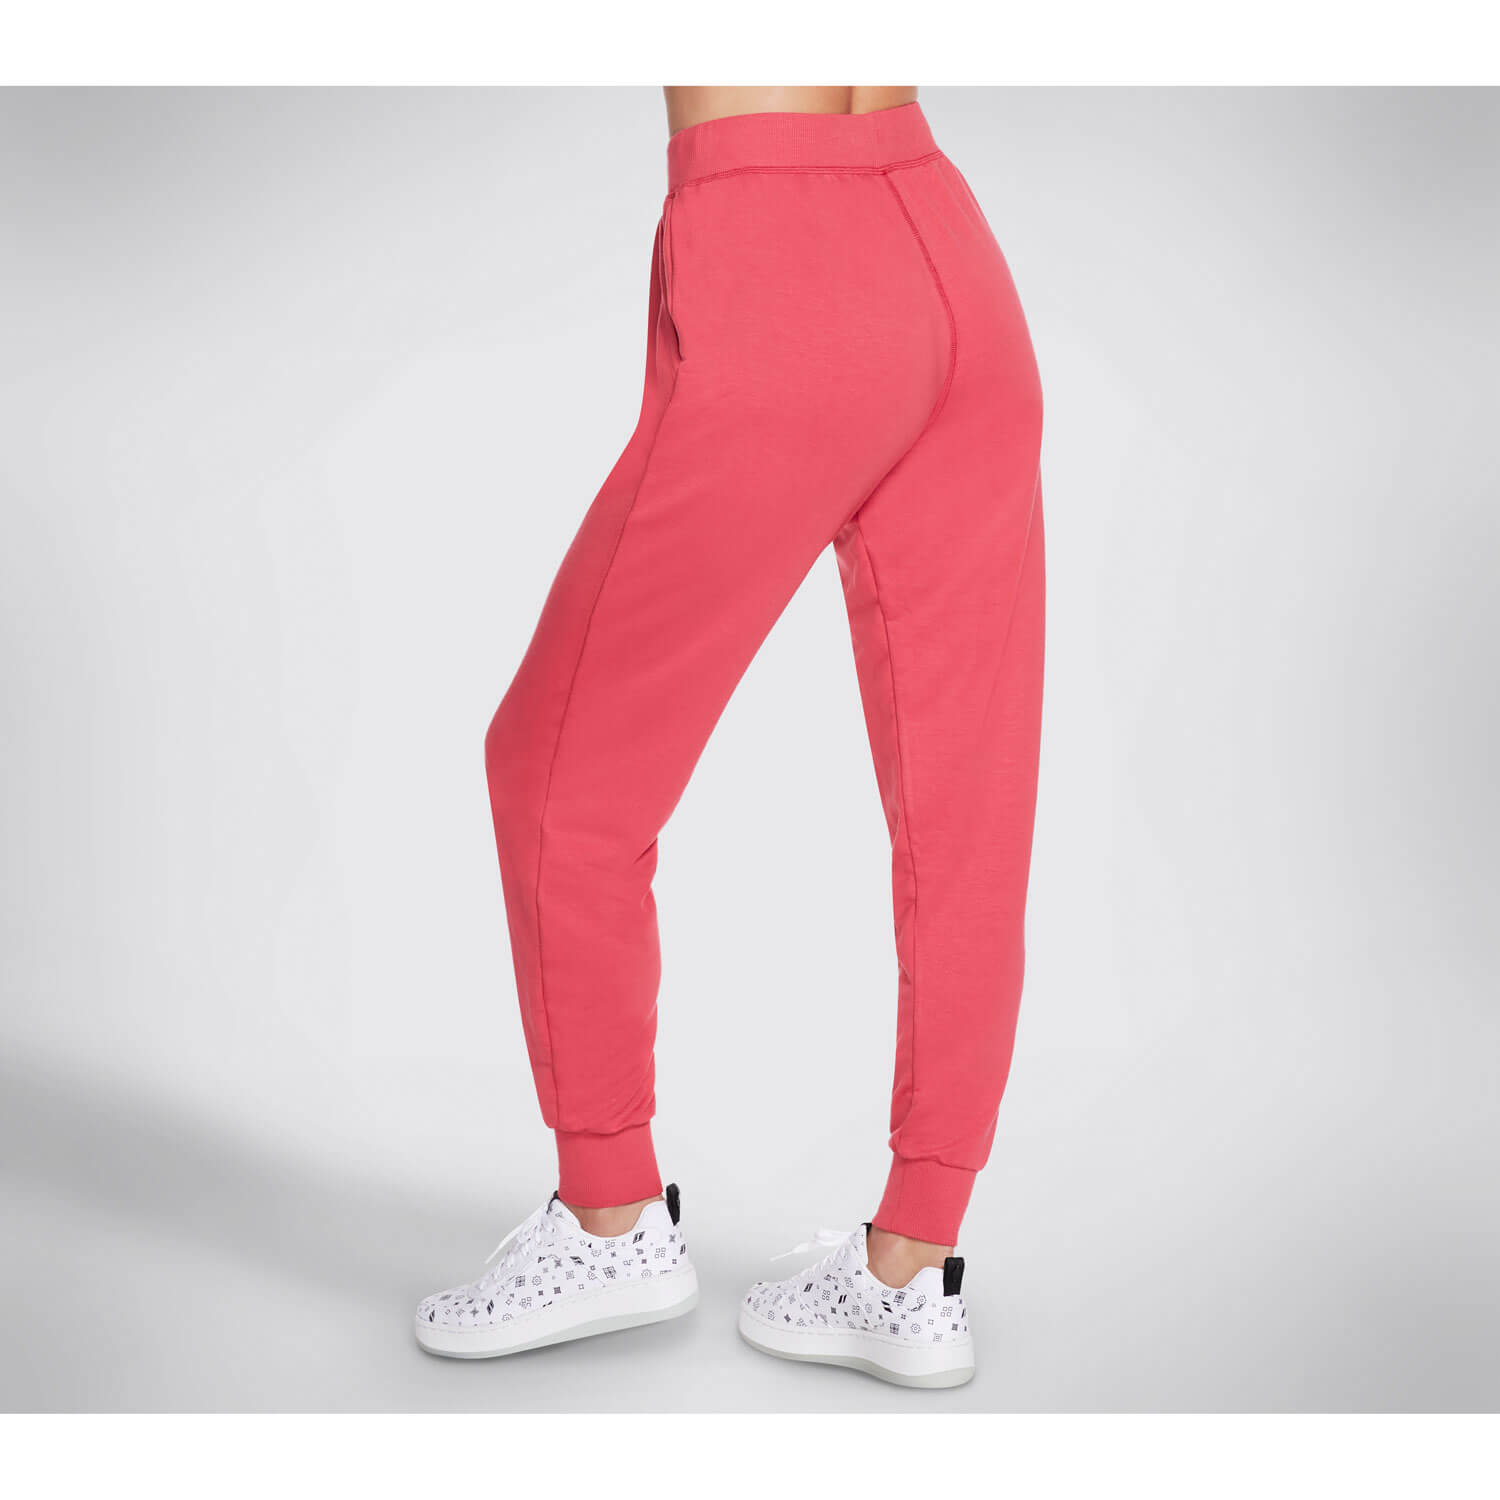 Skechers Apparel Skechluxe Restful Jogger Pant - Wine 1 Shaws Department Stores